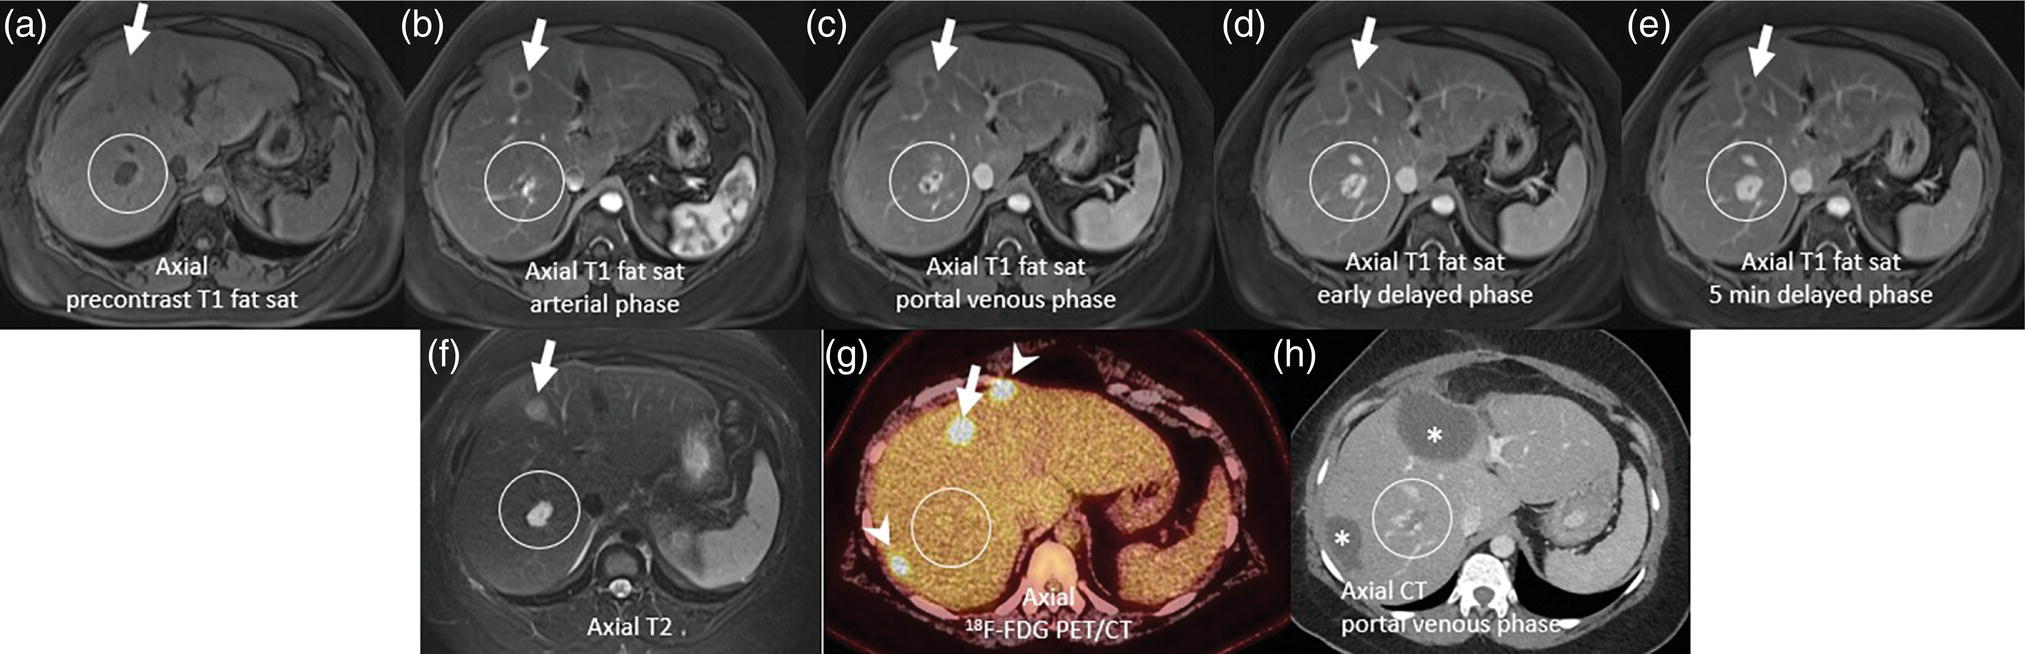 Schematic illustration of MRI and 18F-FDG PET/CT of hepatic metastases and hemangioma prior to metastasectomy.